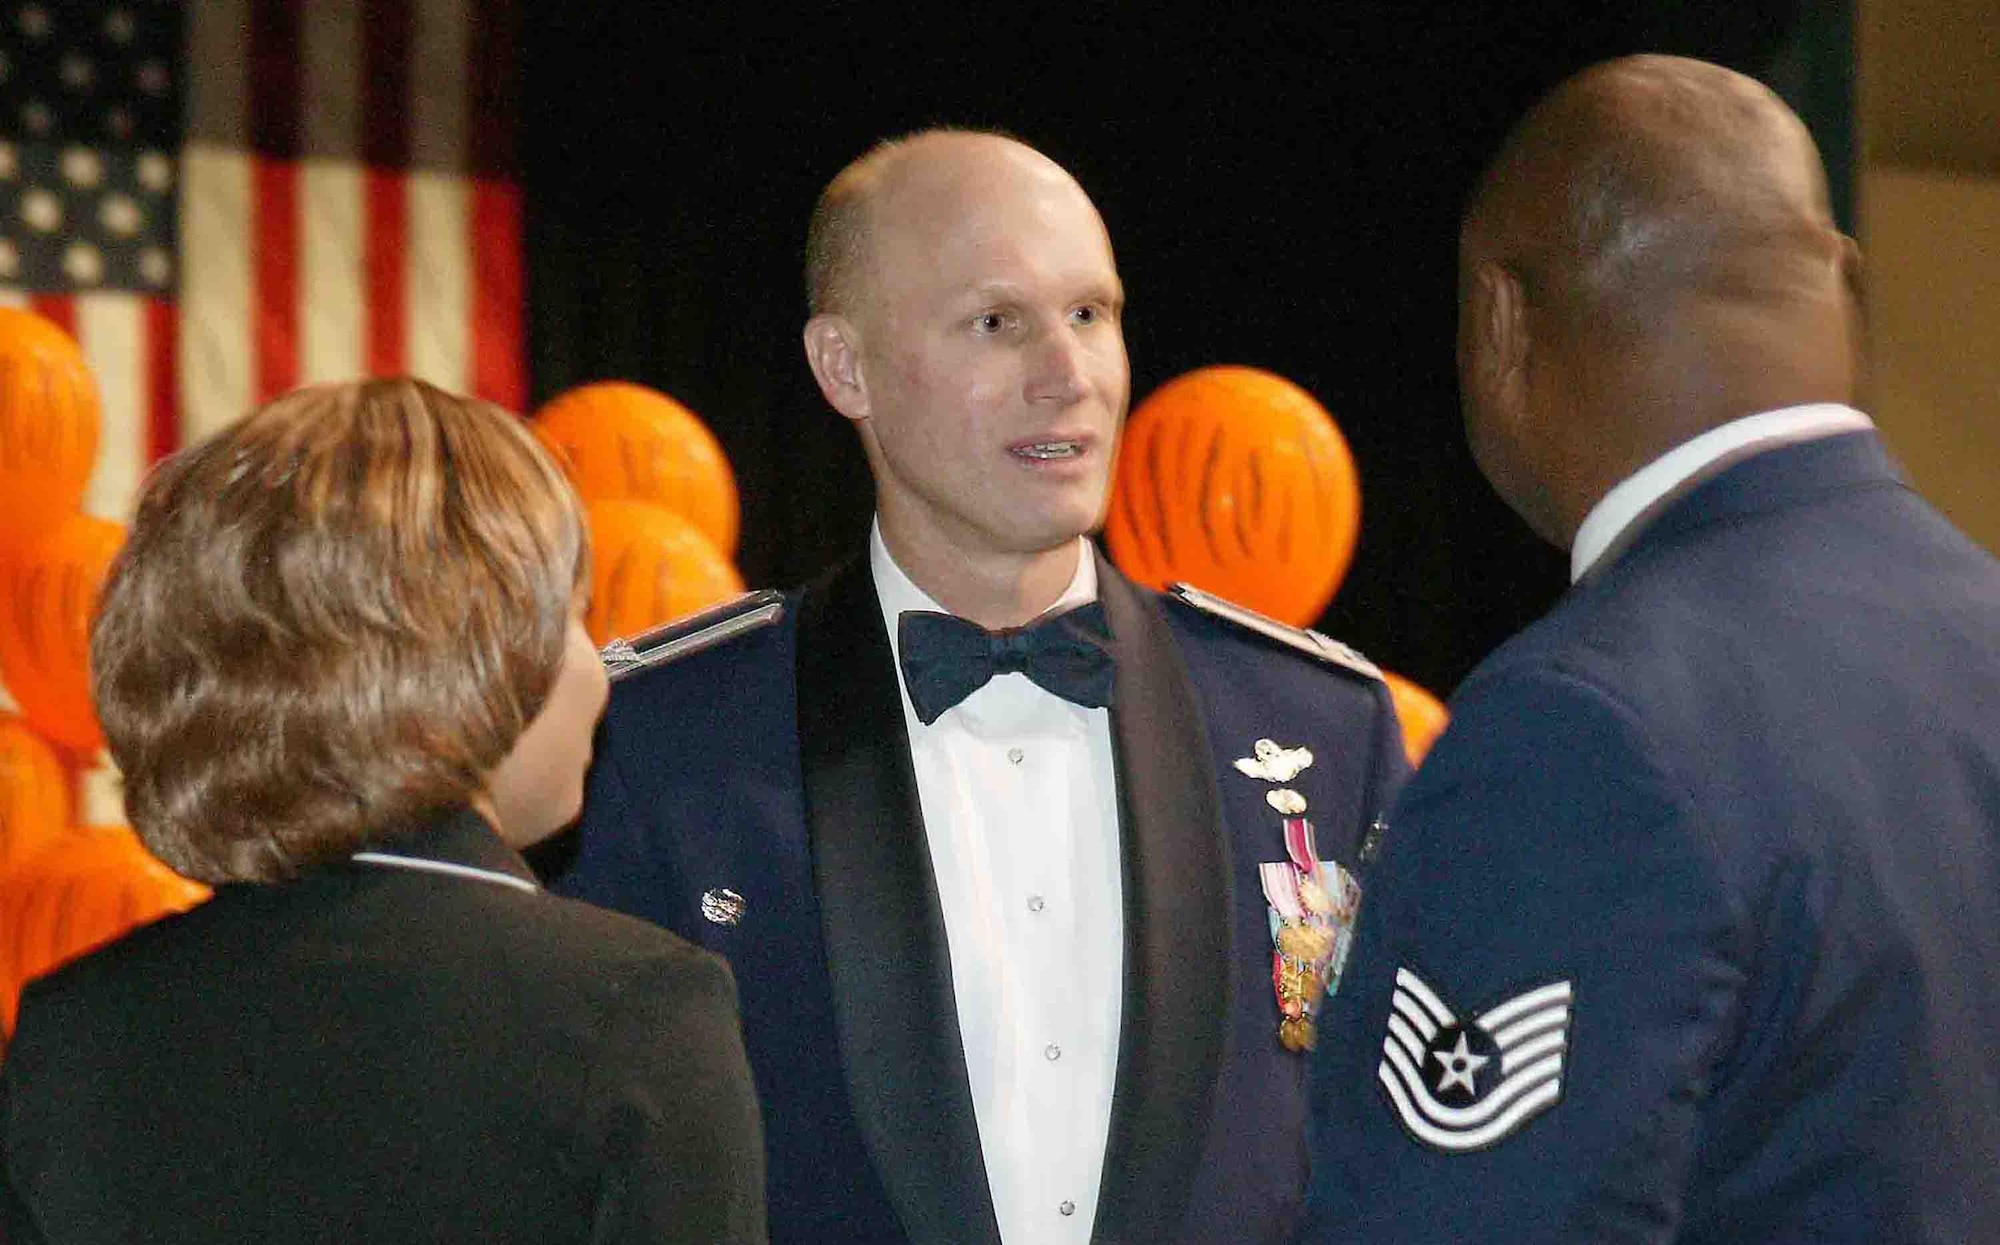 SUMTER, S.C. -- Col. James Post III, 20th Fighter Wing commander, talks to Tech. Sgt. Roosevelt Terry, 79th Aircraft Maintenance Unit, and Sergeant Terry's fiancee, Vernice Glisson, during the 20th Maintenance Group Maintenance Professional of the Year Banquet, April 13 at the Sumter Exhibition Center. The Professional of the Year banquet is held to highlight the contributions of all 20th MXG members and to recognize the most outstanding Airmen within the group. (U.S. Air Force photo/Senior Airman John Gordinier)